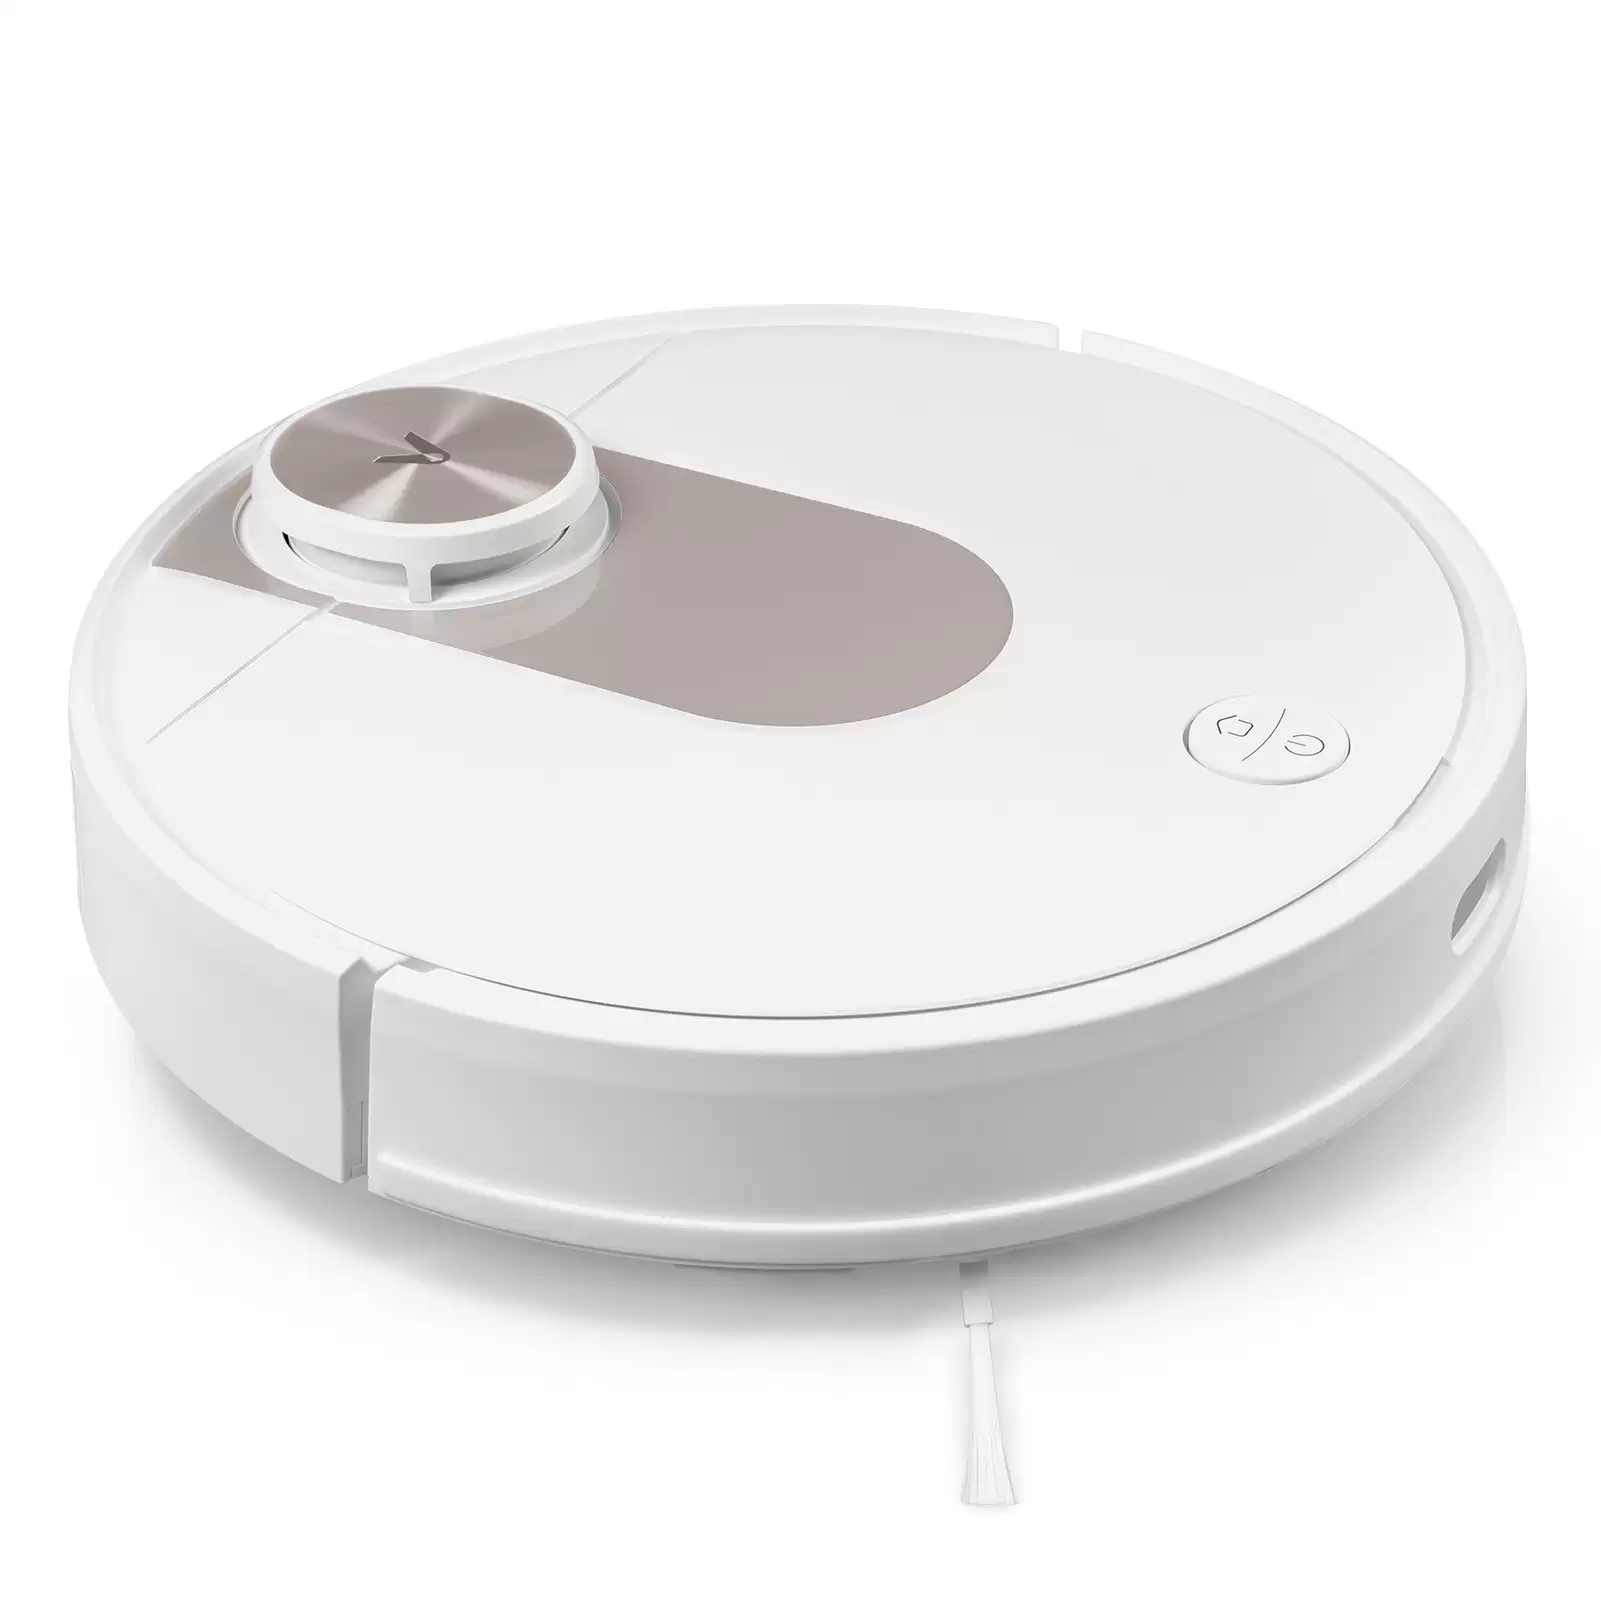 Order In Just $279.99 $169.6 Off Viomi Se Robot Vacuum Cleaner, Limited Offers $279.99 With This Discount Coupon At Tomtop